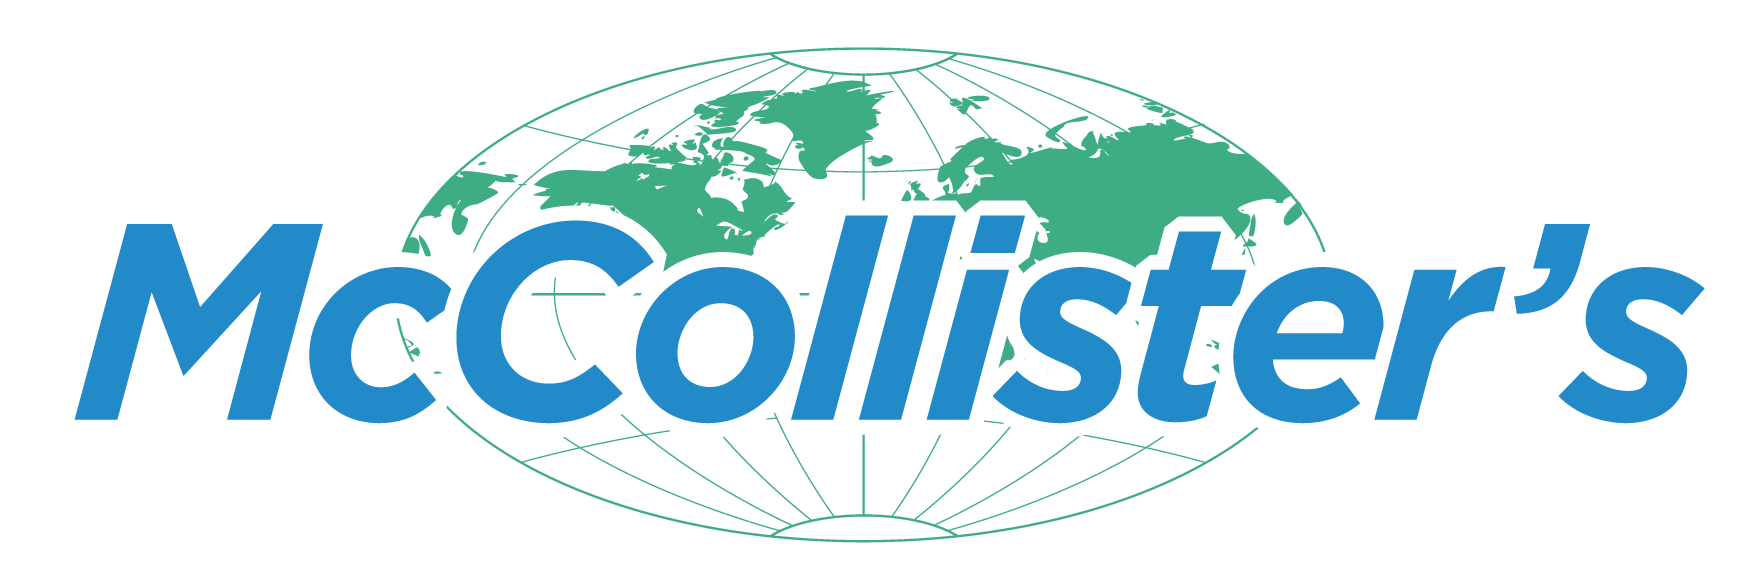 McCollister's Global Services